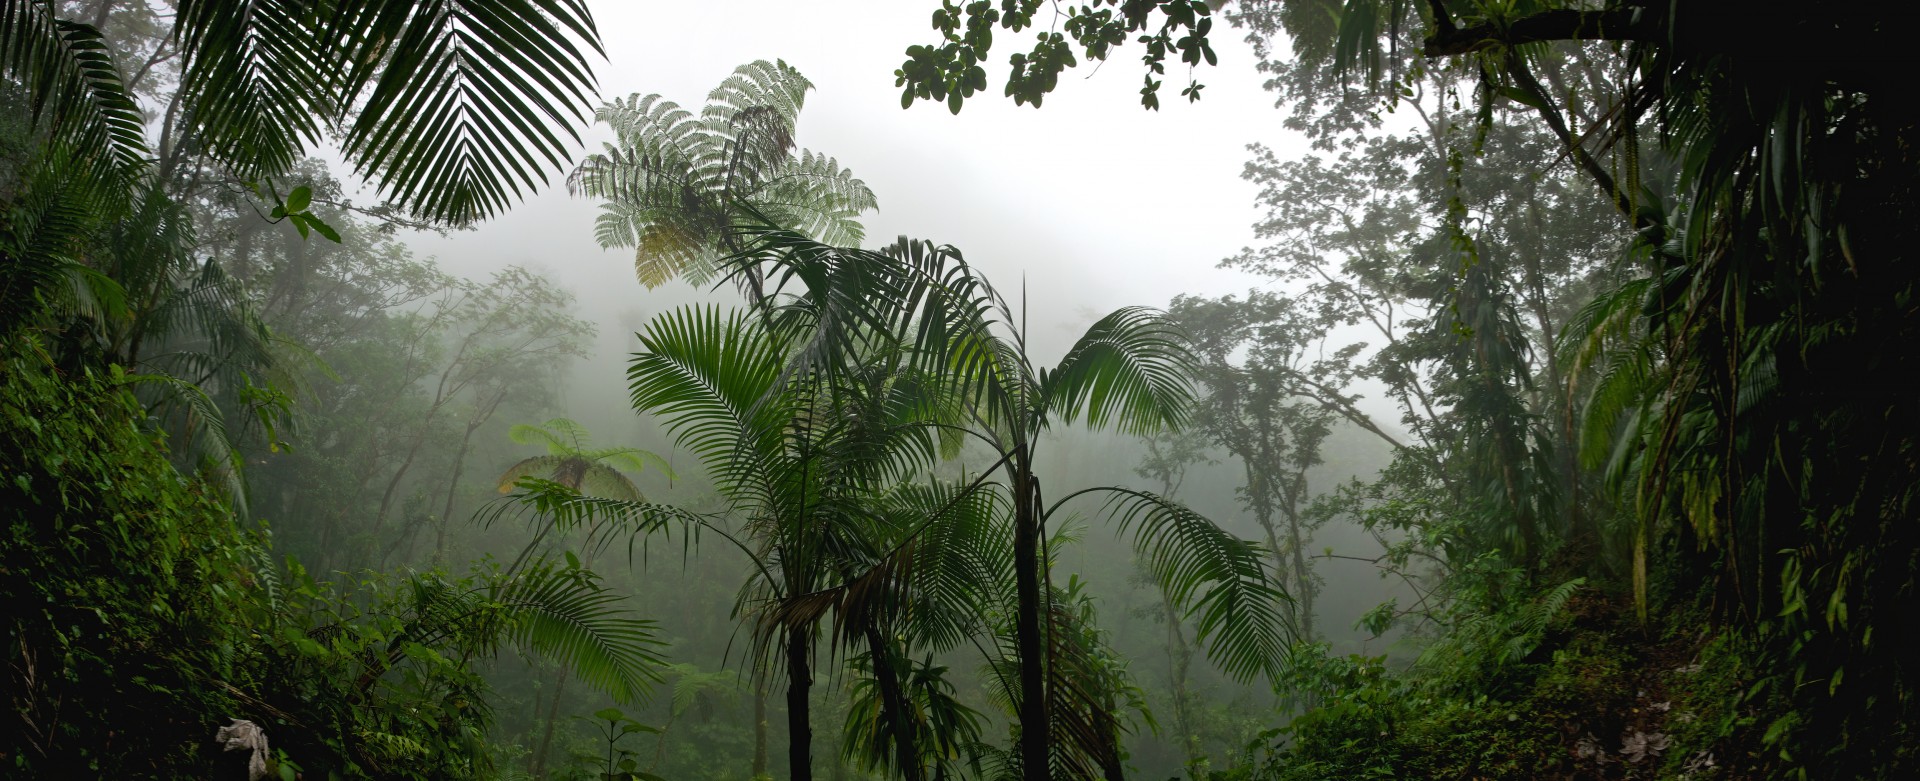 Tropical rain forest mist in the lush green jungle of the Caribbean.